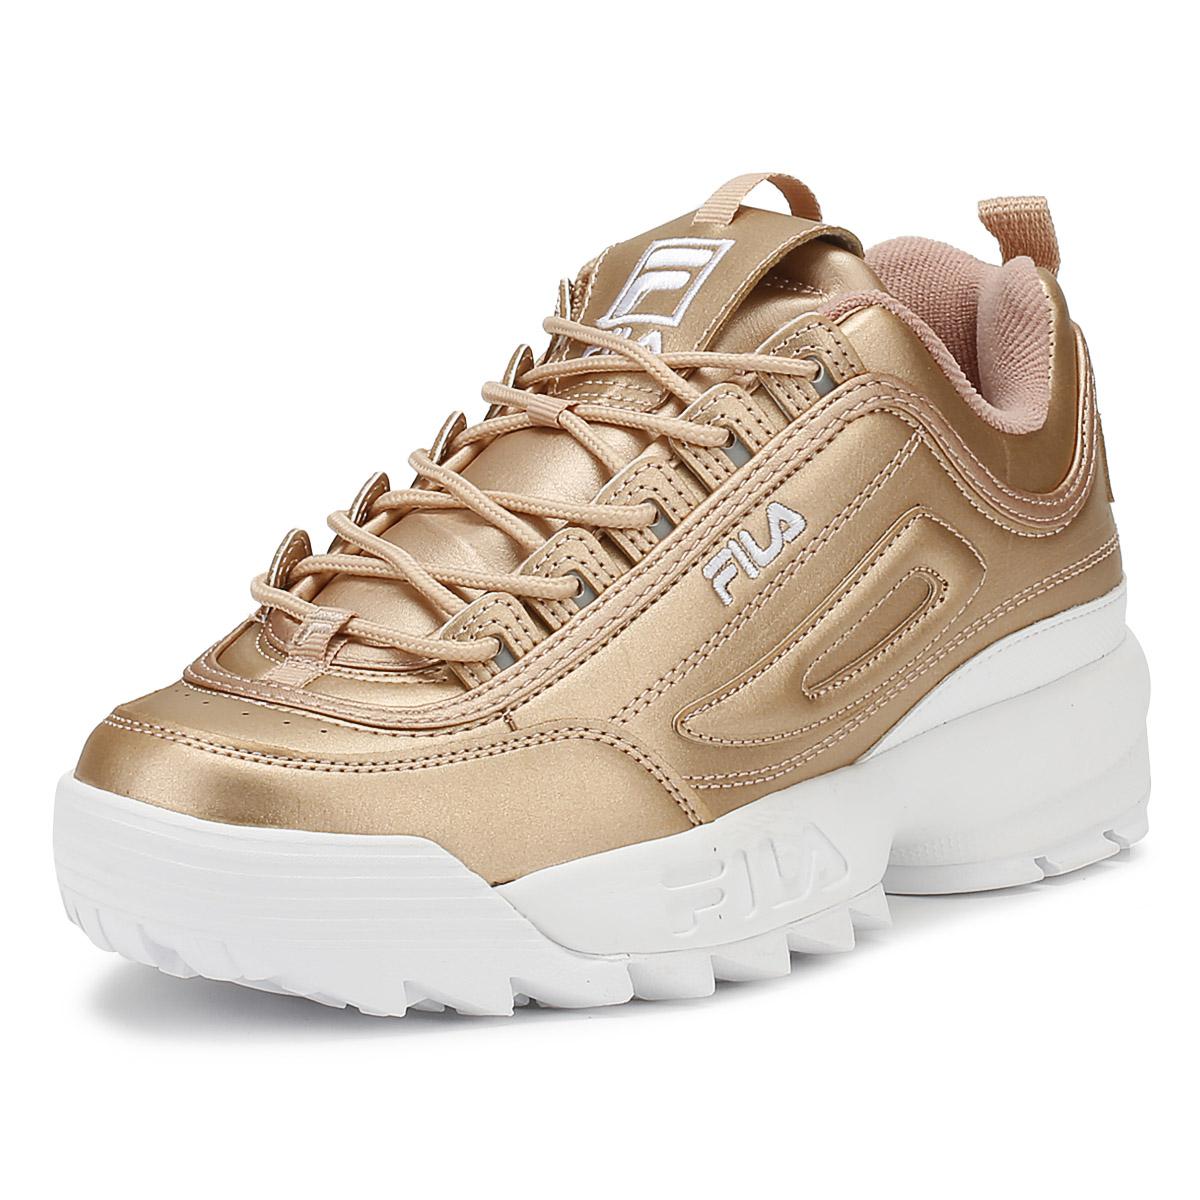 Fila Sneakers Rose Gold Discount, SAVE 55%.